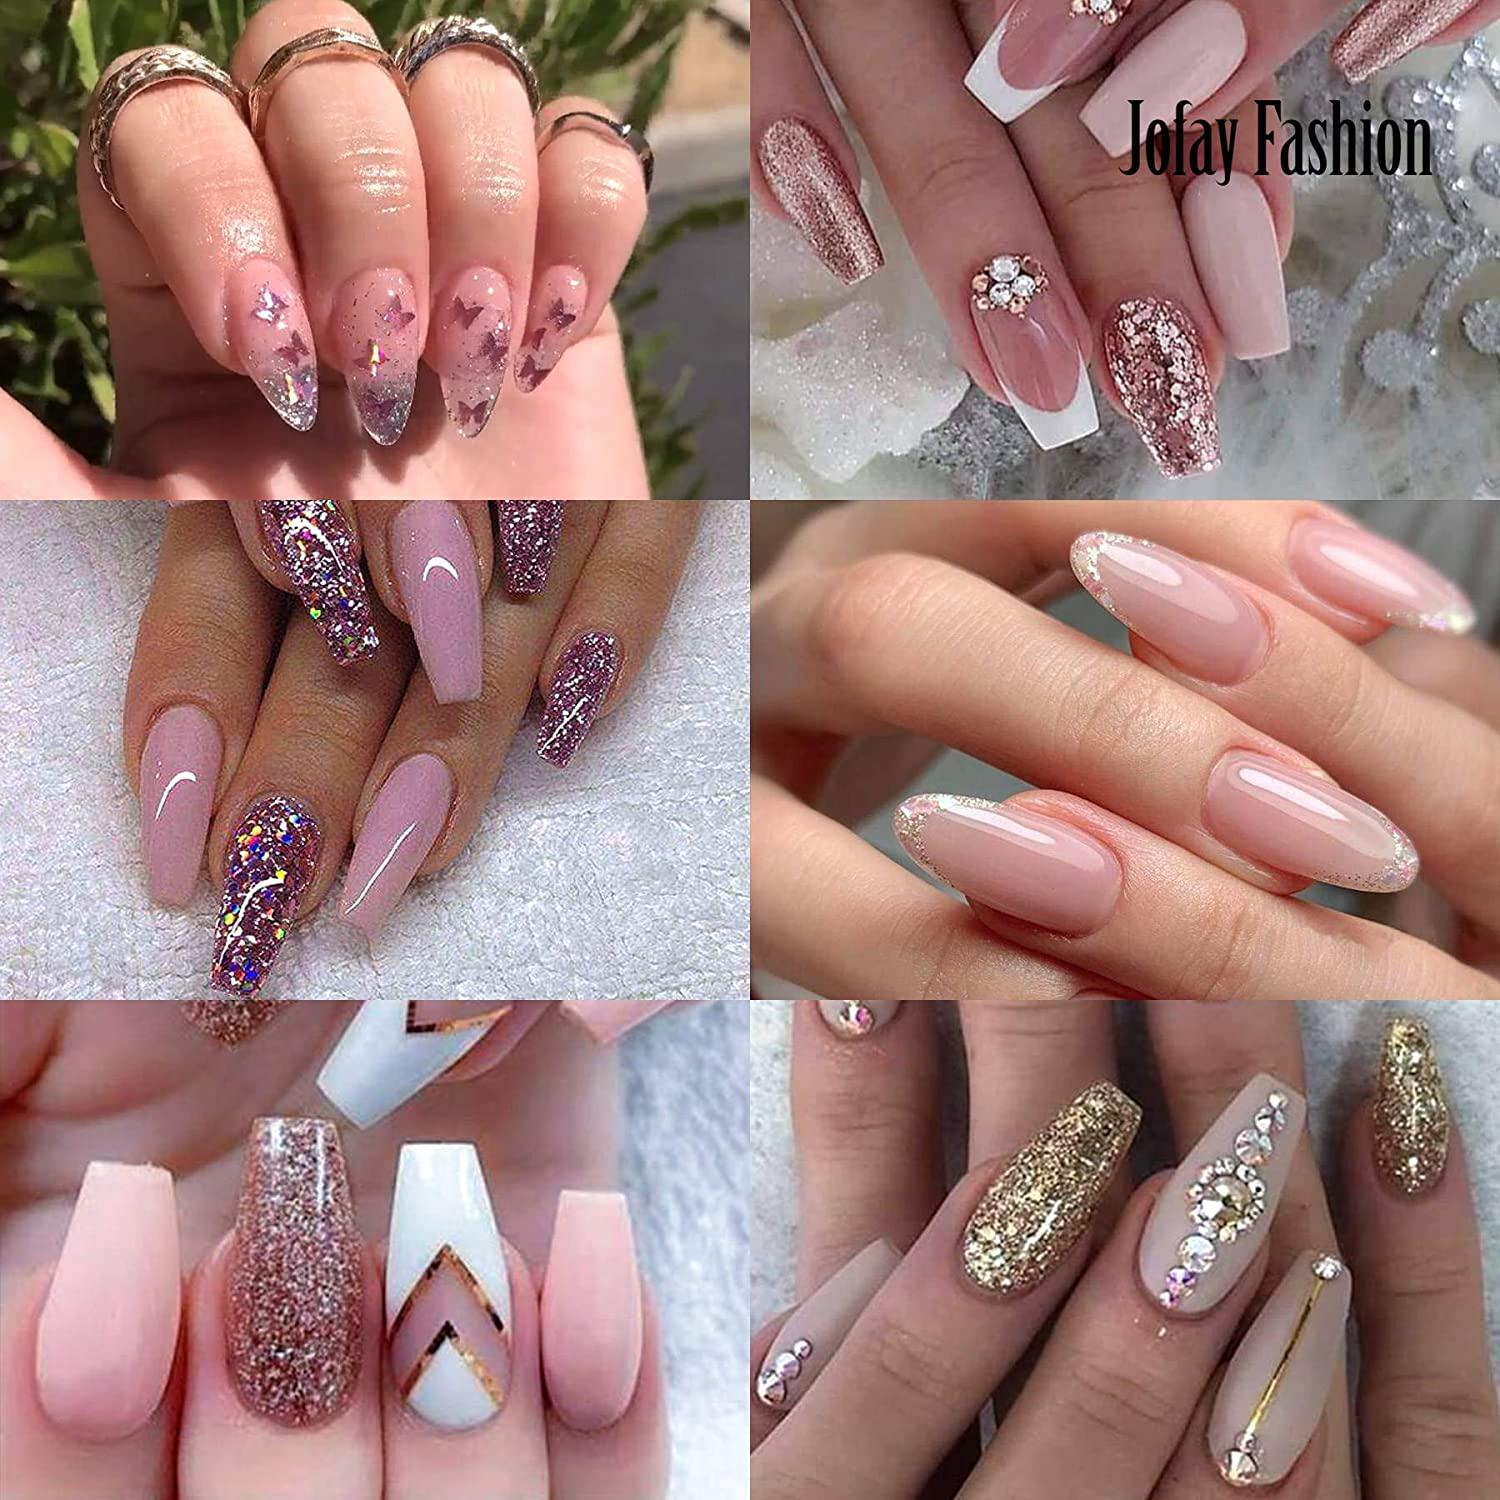 35 Winter Nail Design Ideas to Try at Home or in the Salon | Allure